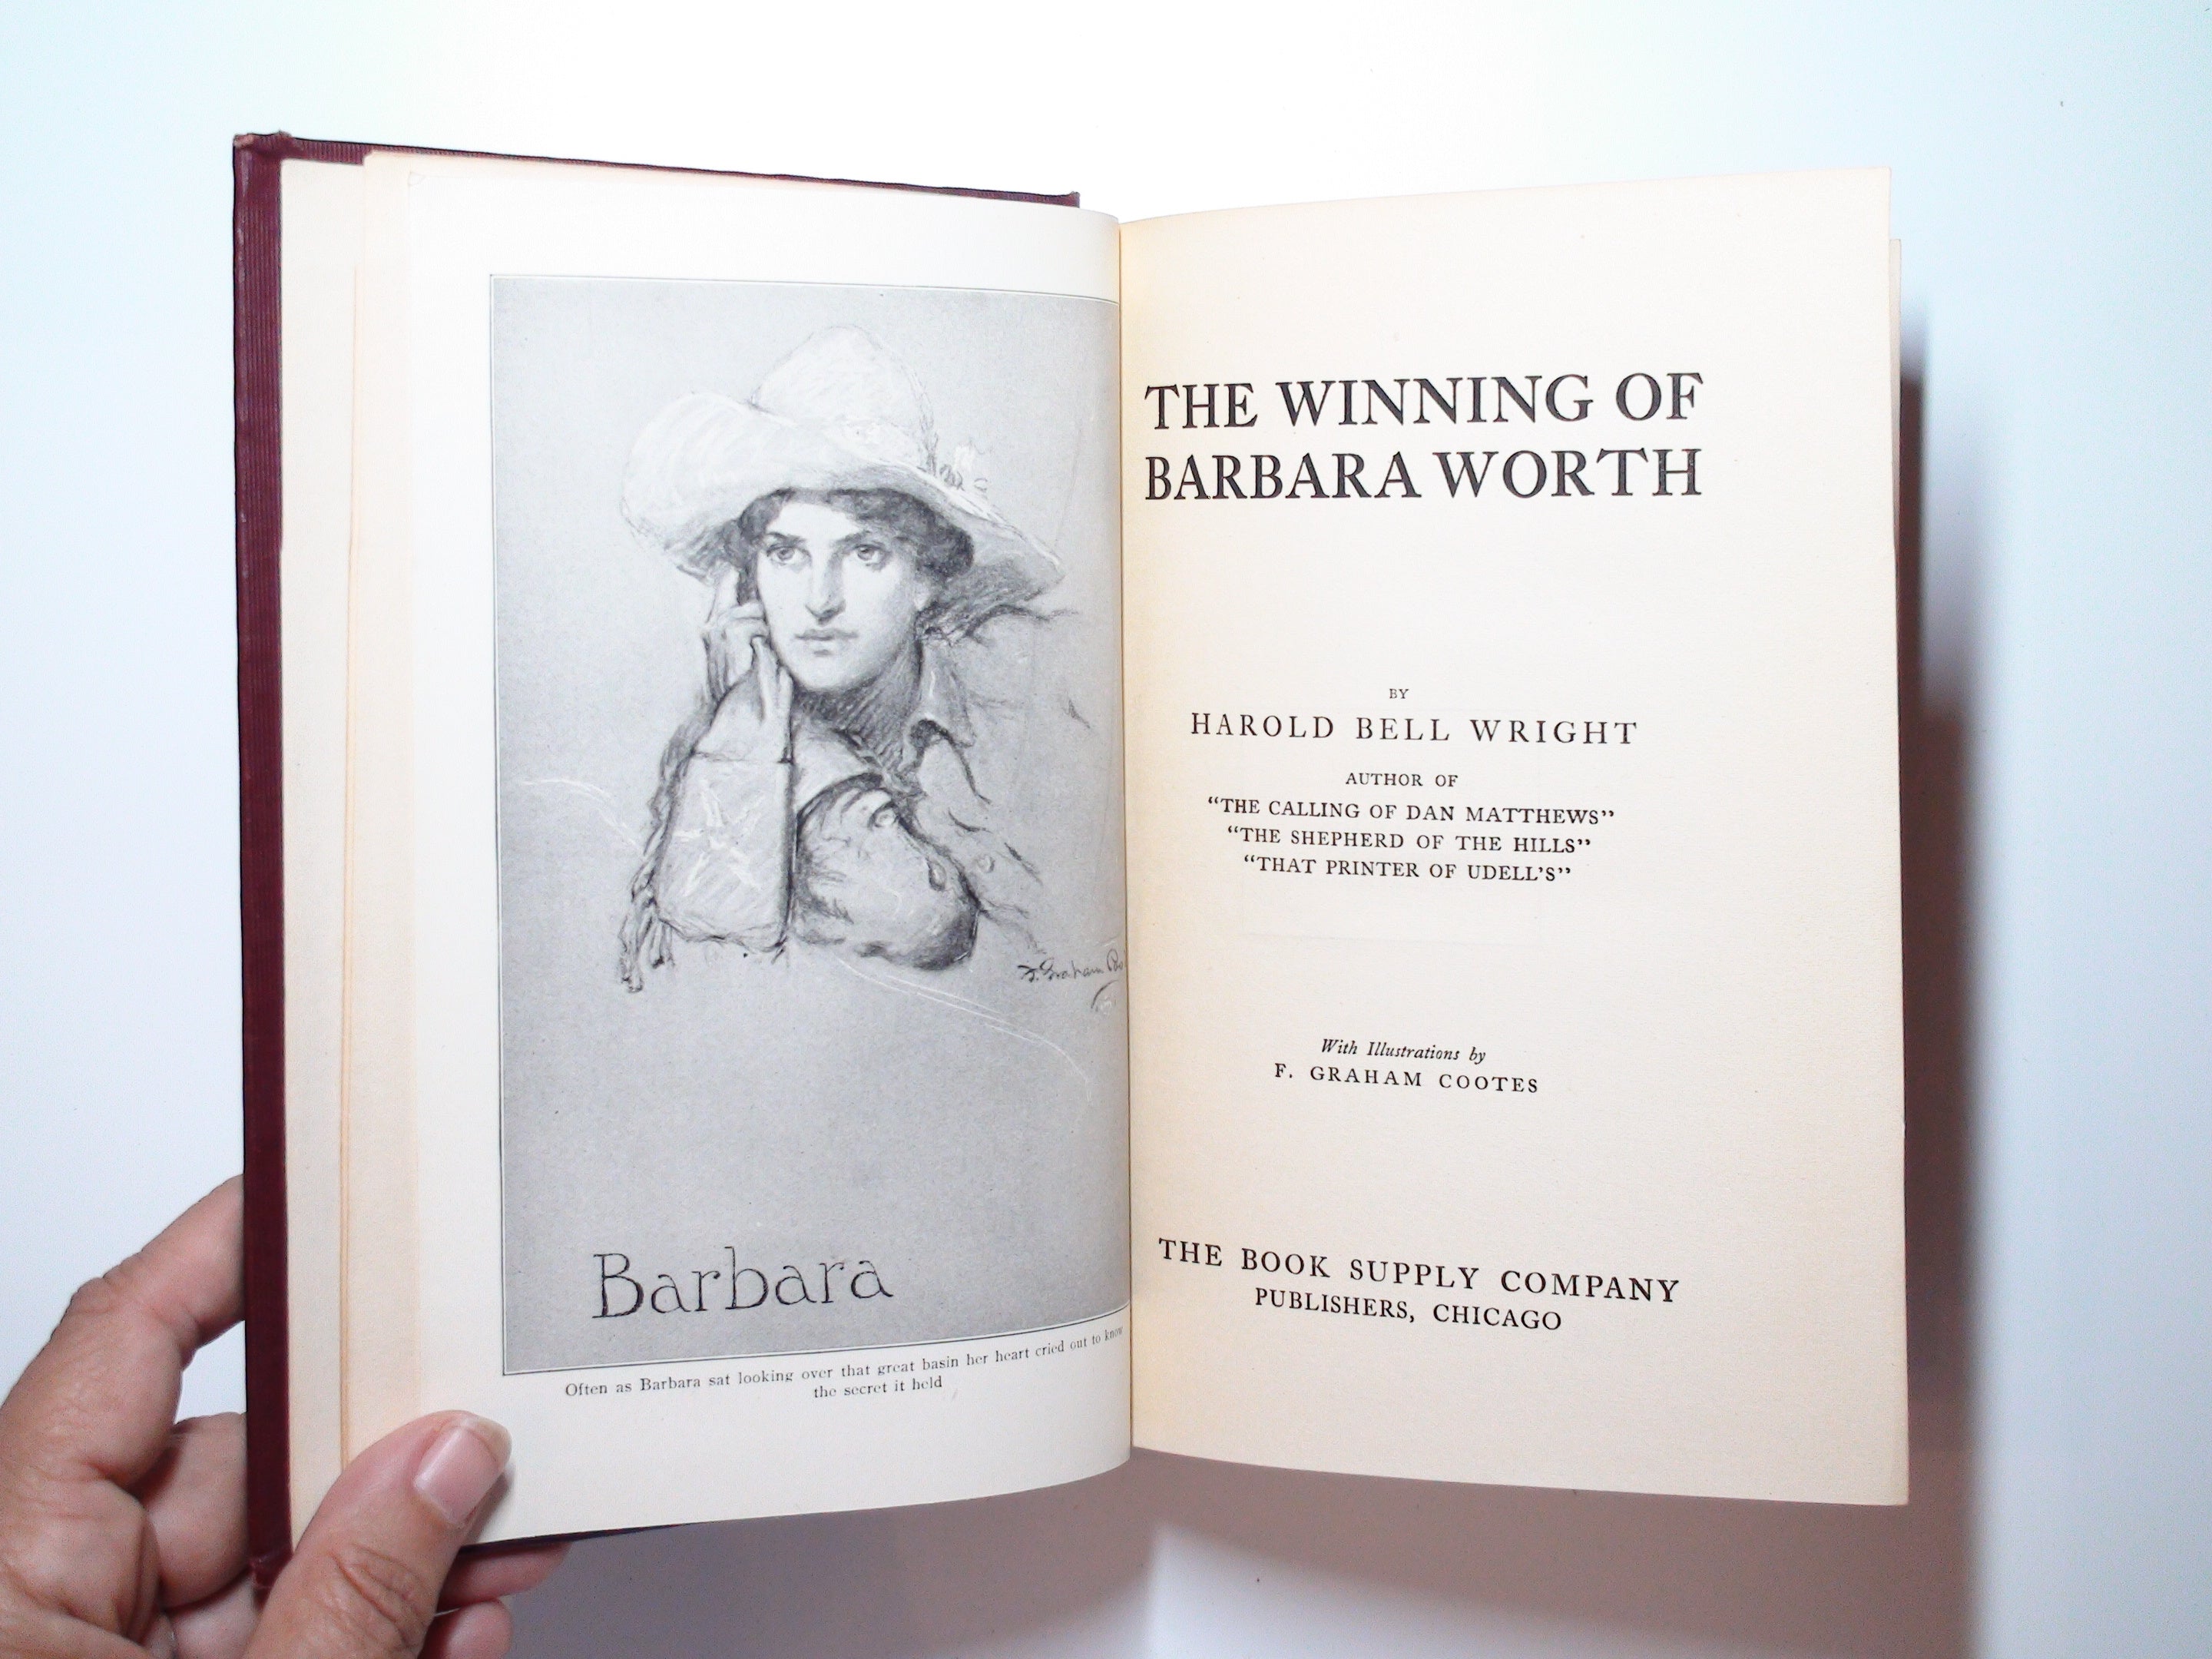 The Winning of Barbara Worth, by Harold Bell Wright, Illustrated by F. Graham Cootes, 1911